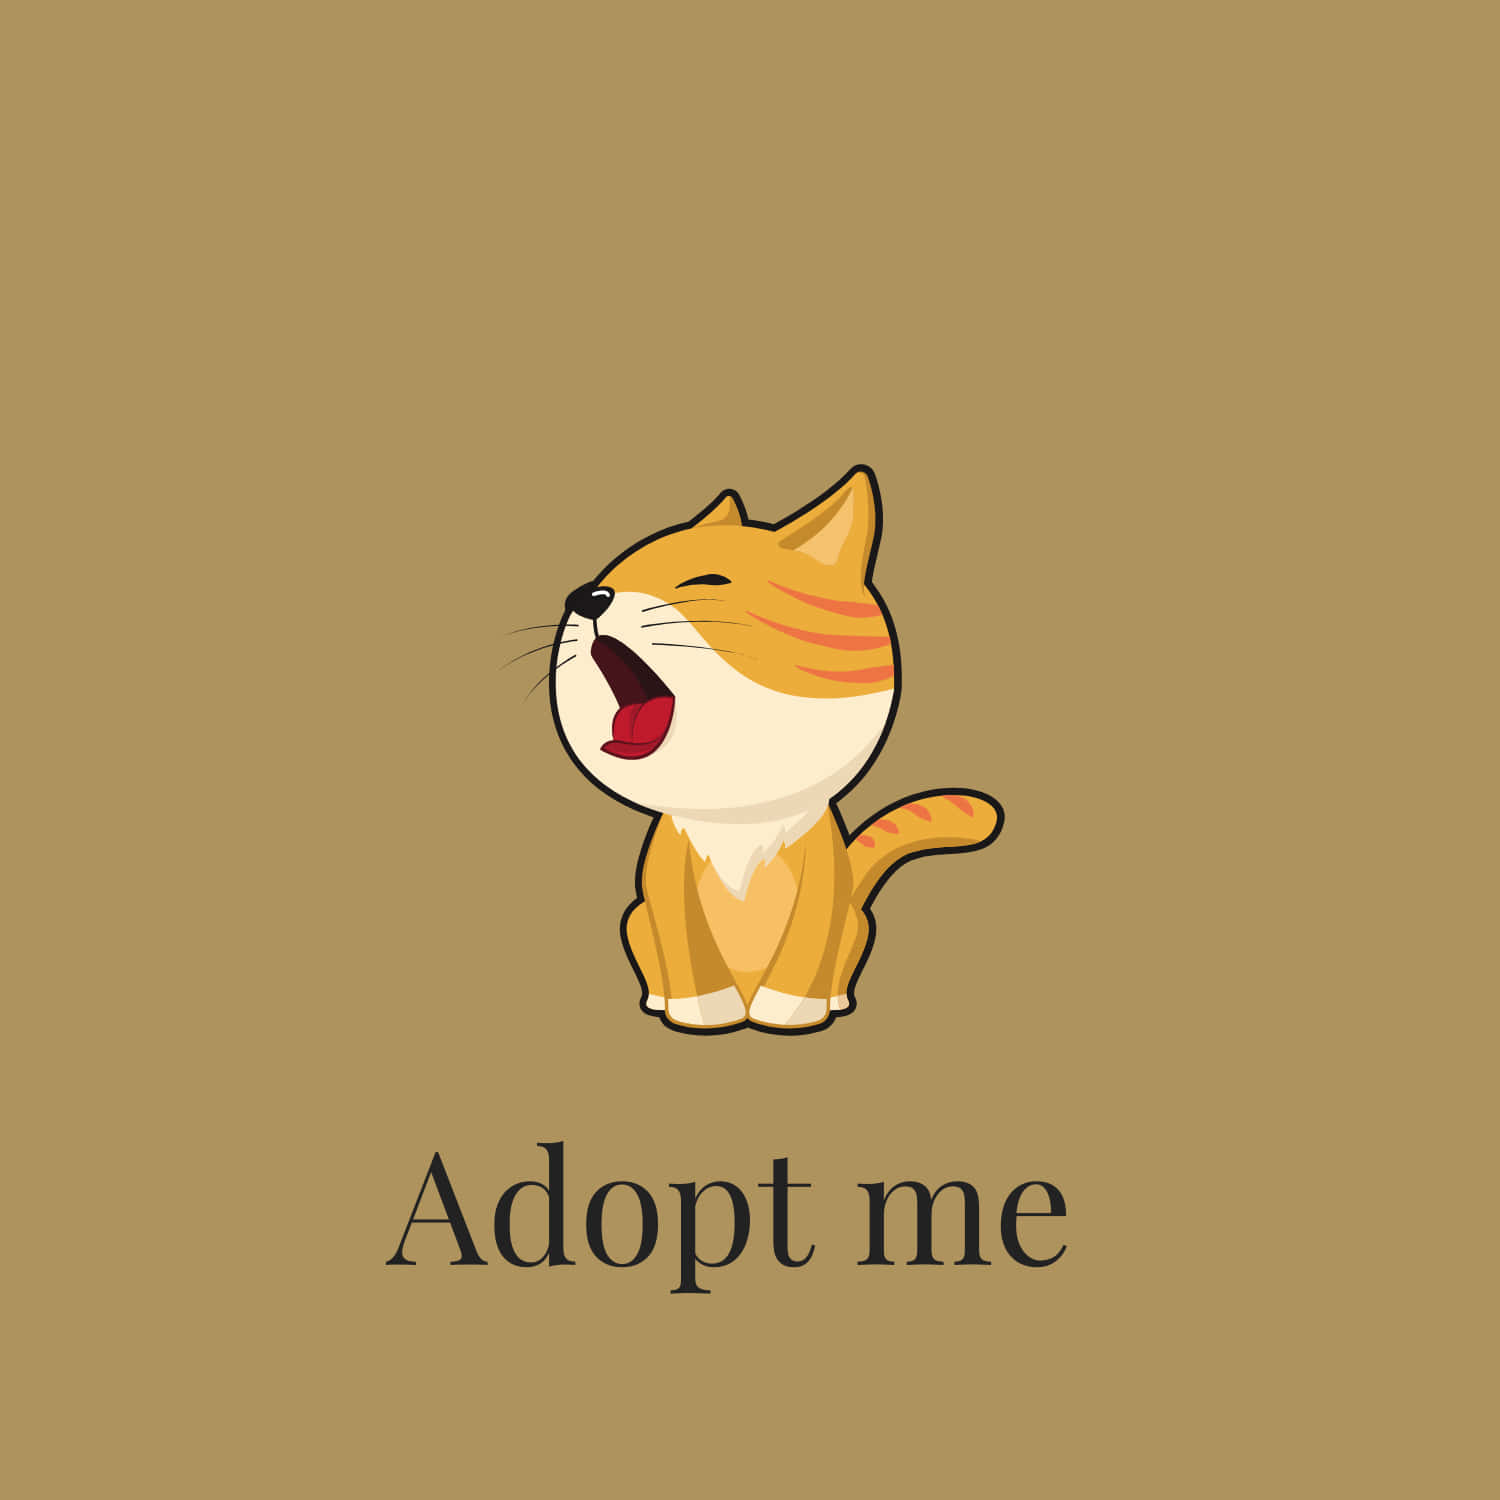 adopt me - a cat with the words adopt me